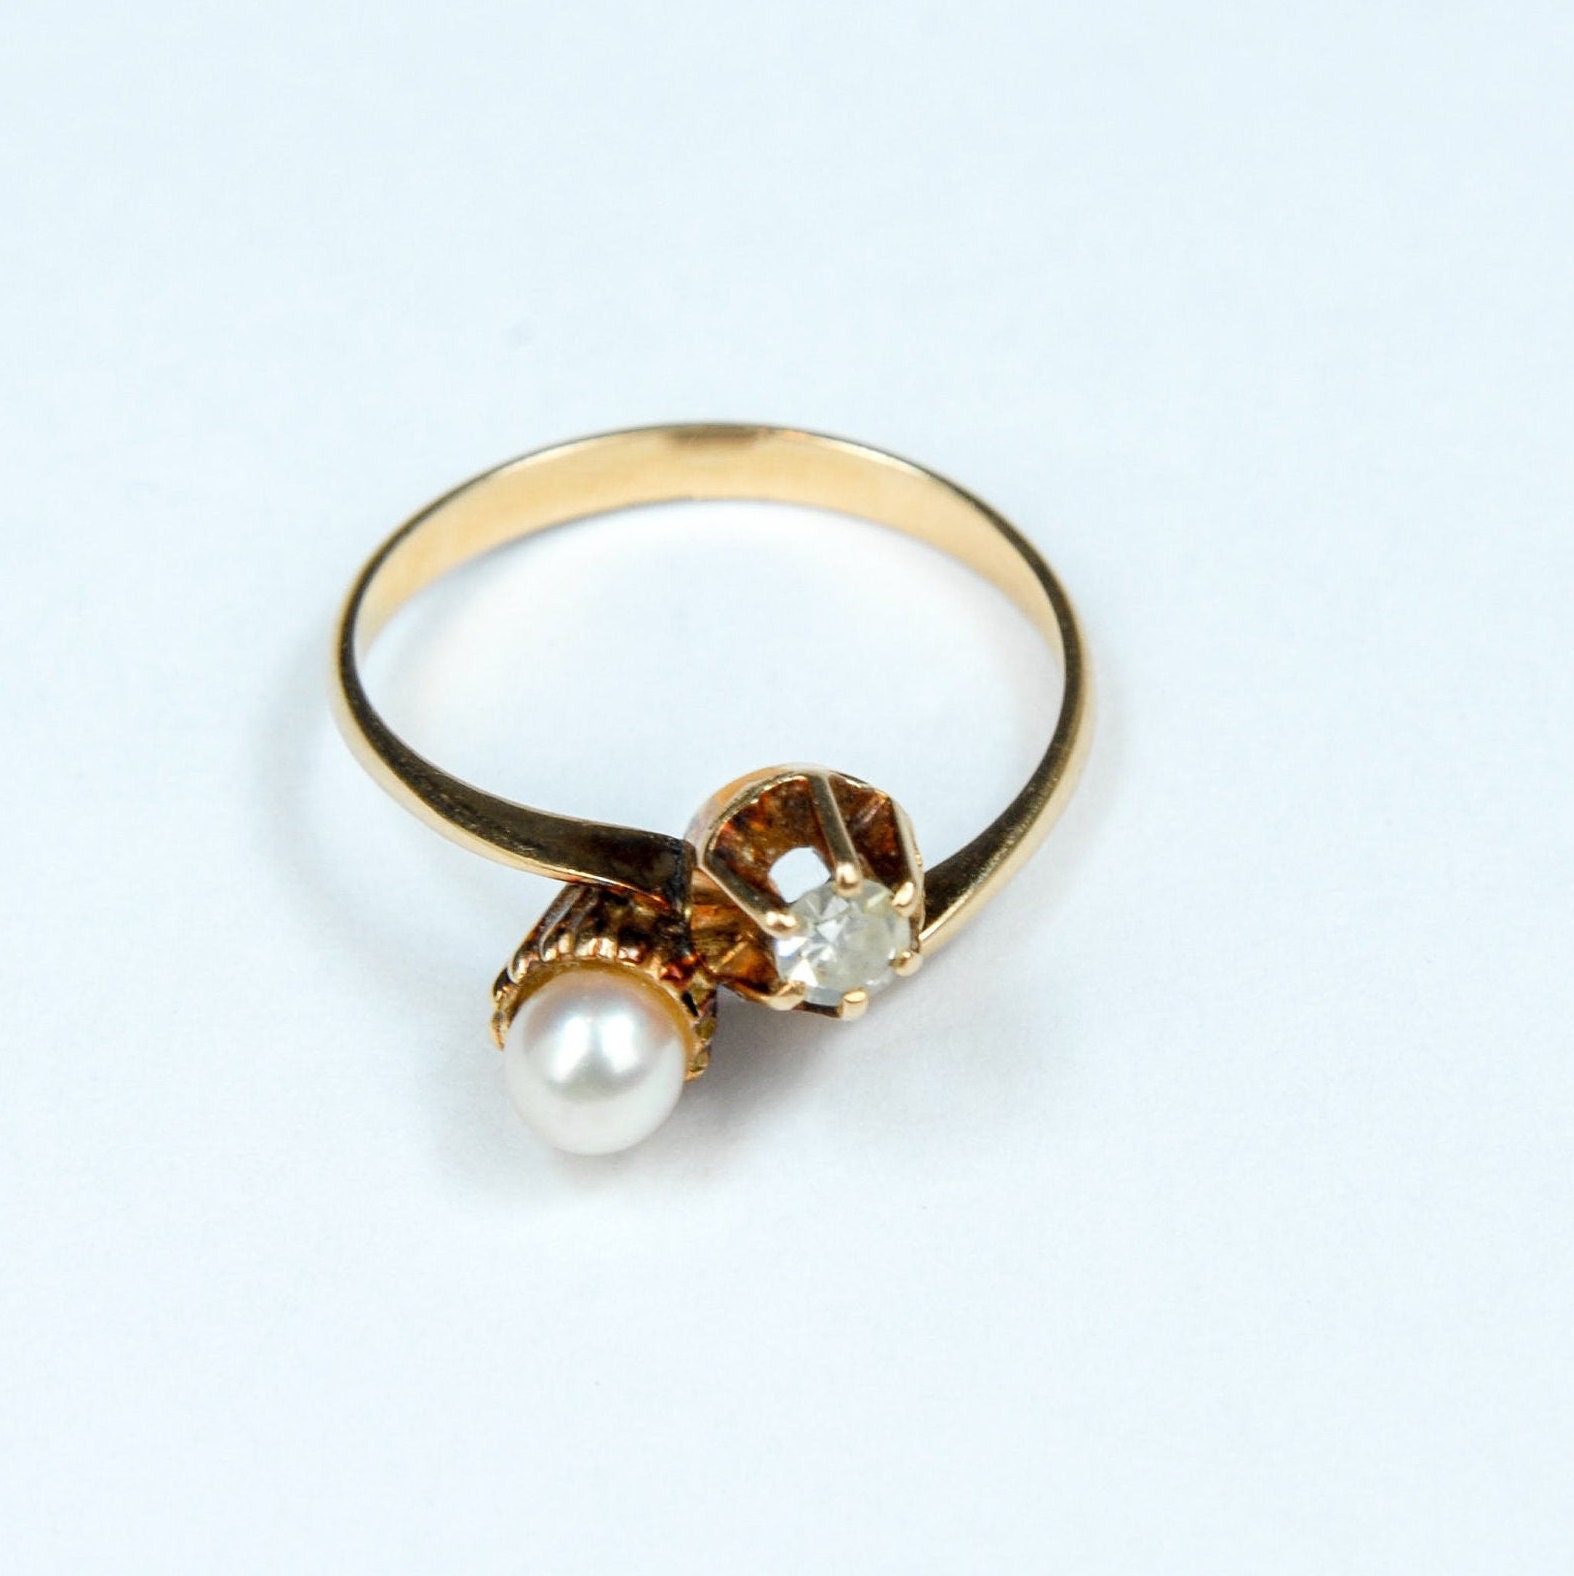 Vintage Estate Single Cut Diamond and Pearl Ring Size 6 - Etsy